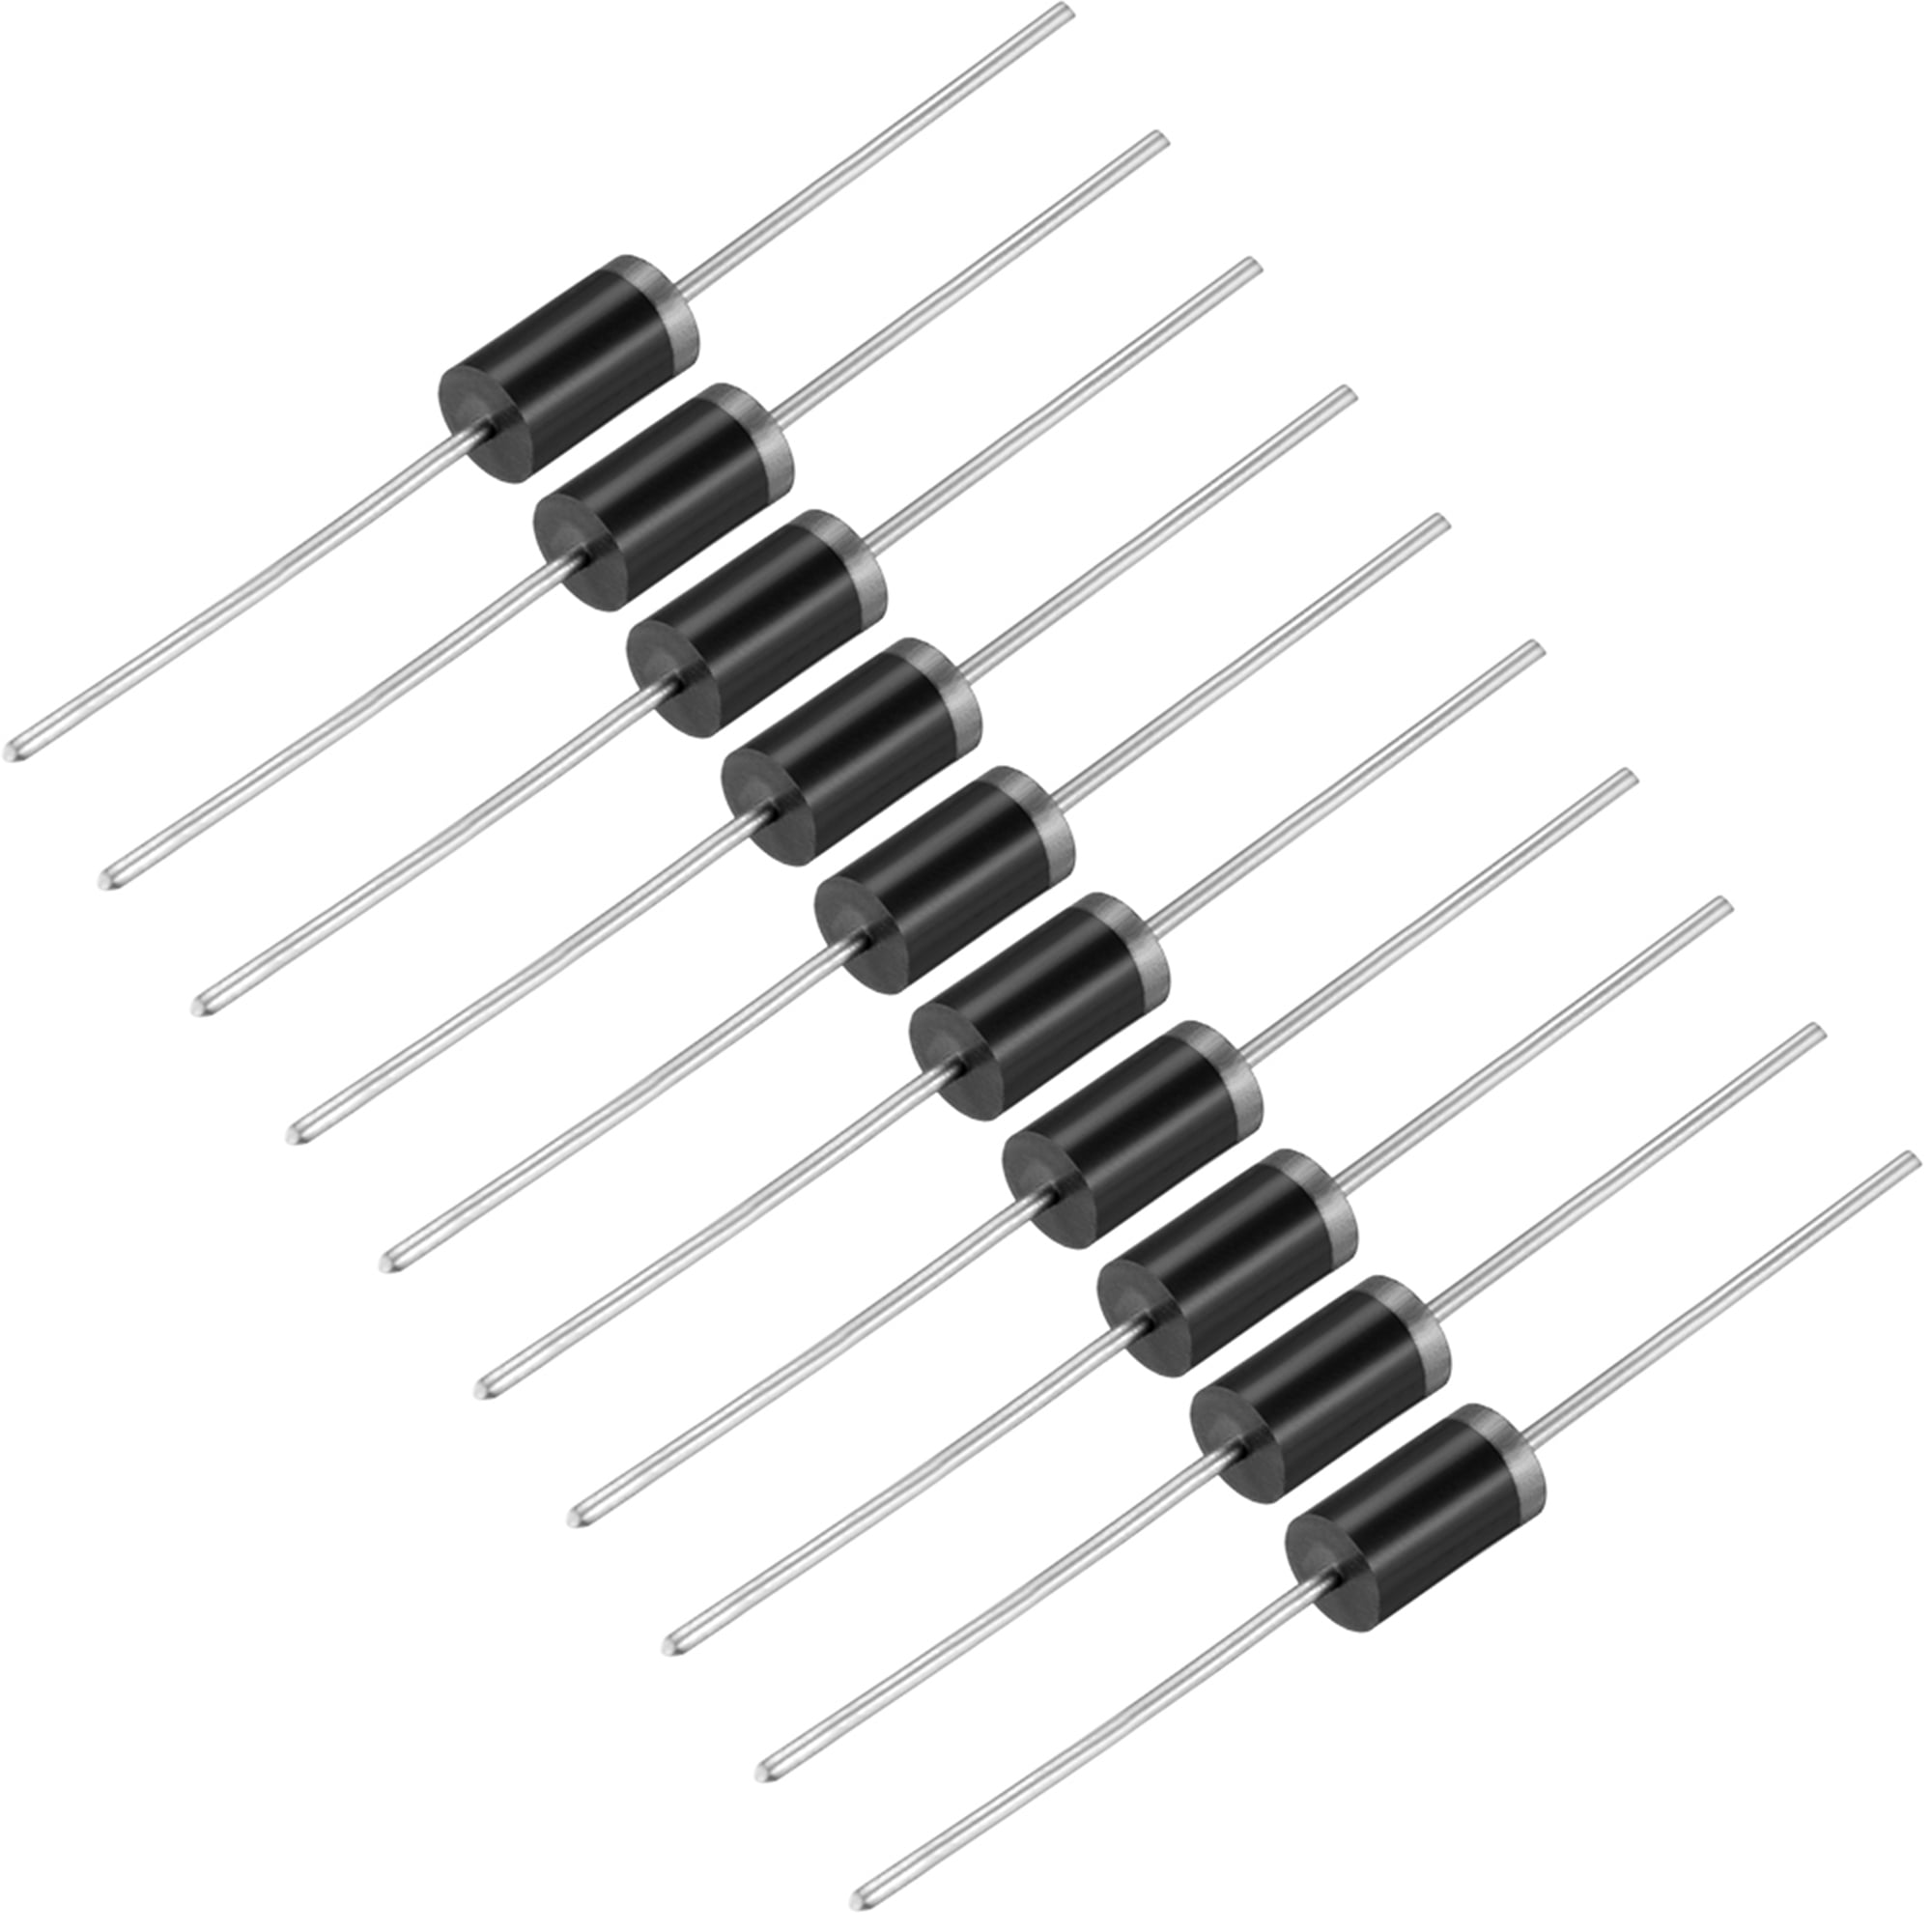 uxcell 1N4007 Rectifier Diode 1A 1kV Axial Electronic Silicon Diodes 50pcs 